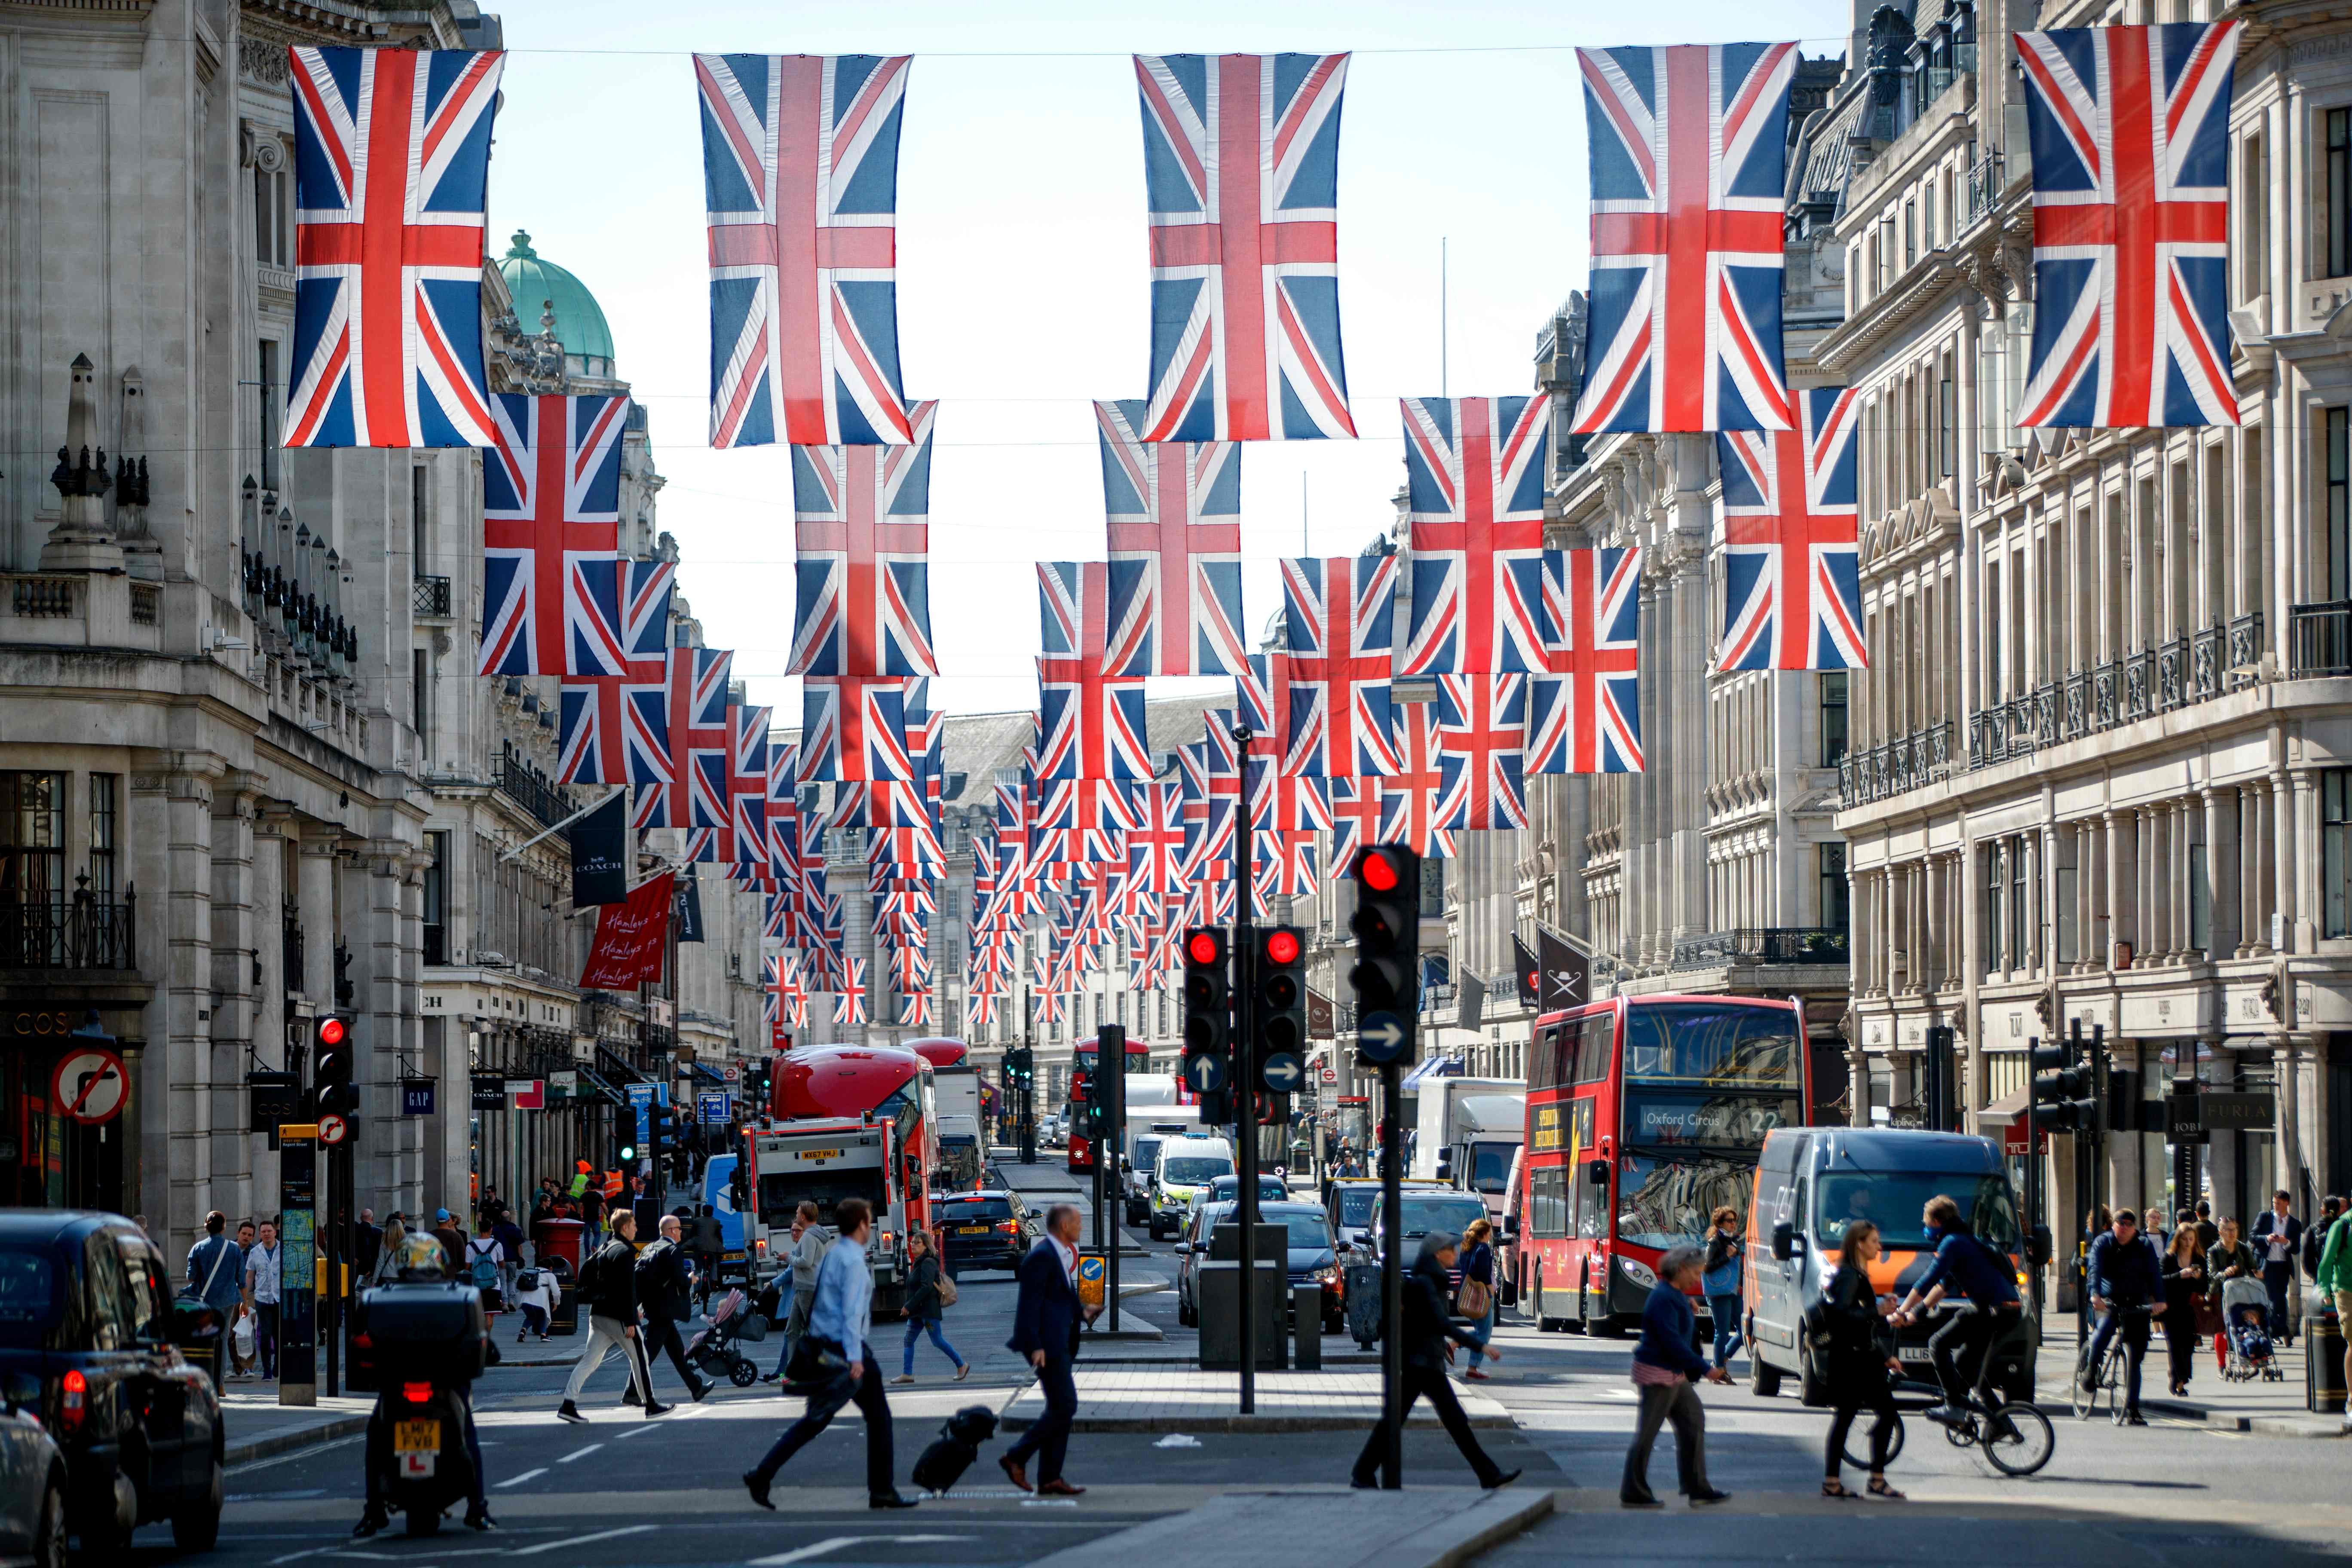 Union flags decorate Regent Street in London on May 11, ahead of the royal wedding of Prince Harry and US actress Meghan Markle. Britain is going through a new period of great reform known as Brexit. Once out of the EU, Britain will be free to control its own trade policy, embrace free markets, and look across the globe for partnerships. Photo: AFP  